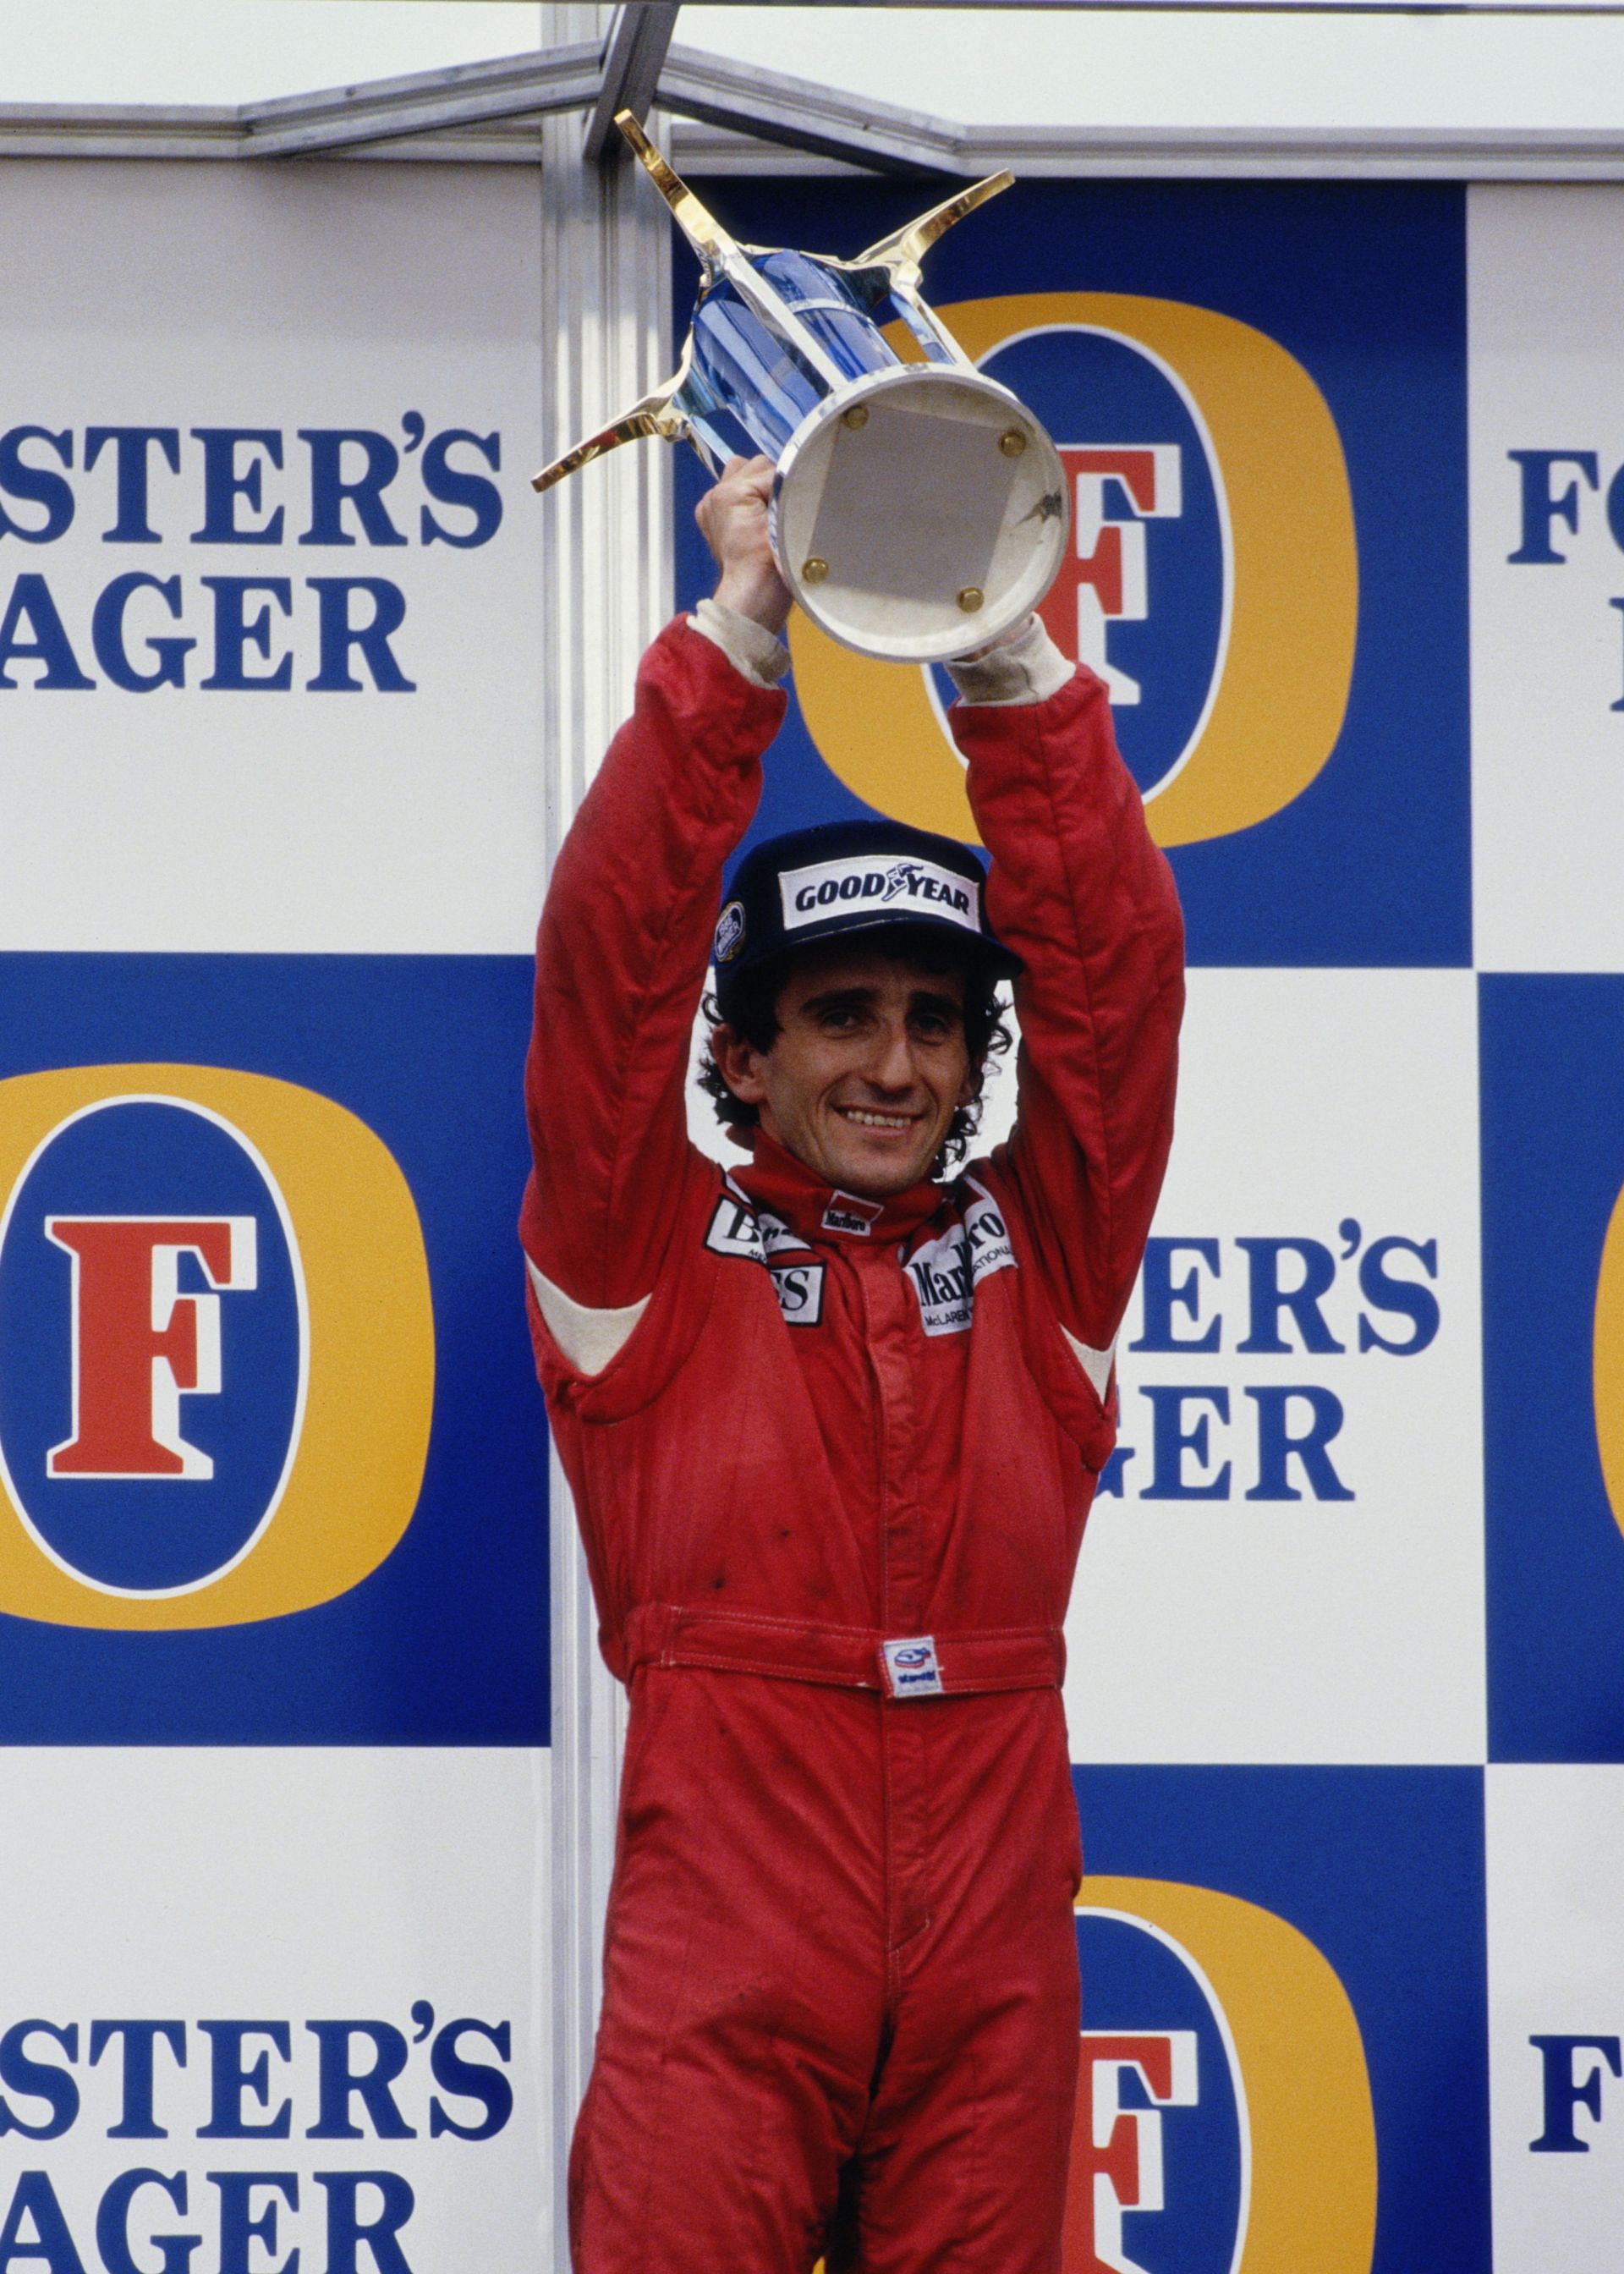 Alain Prost wins the Grand Prix of Australia (Photo by Roger Gould/Getty Images)